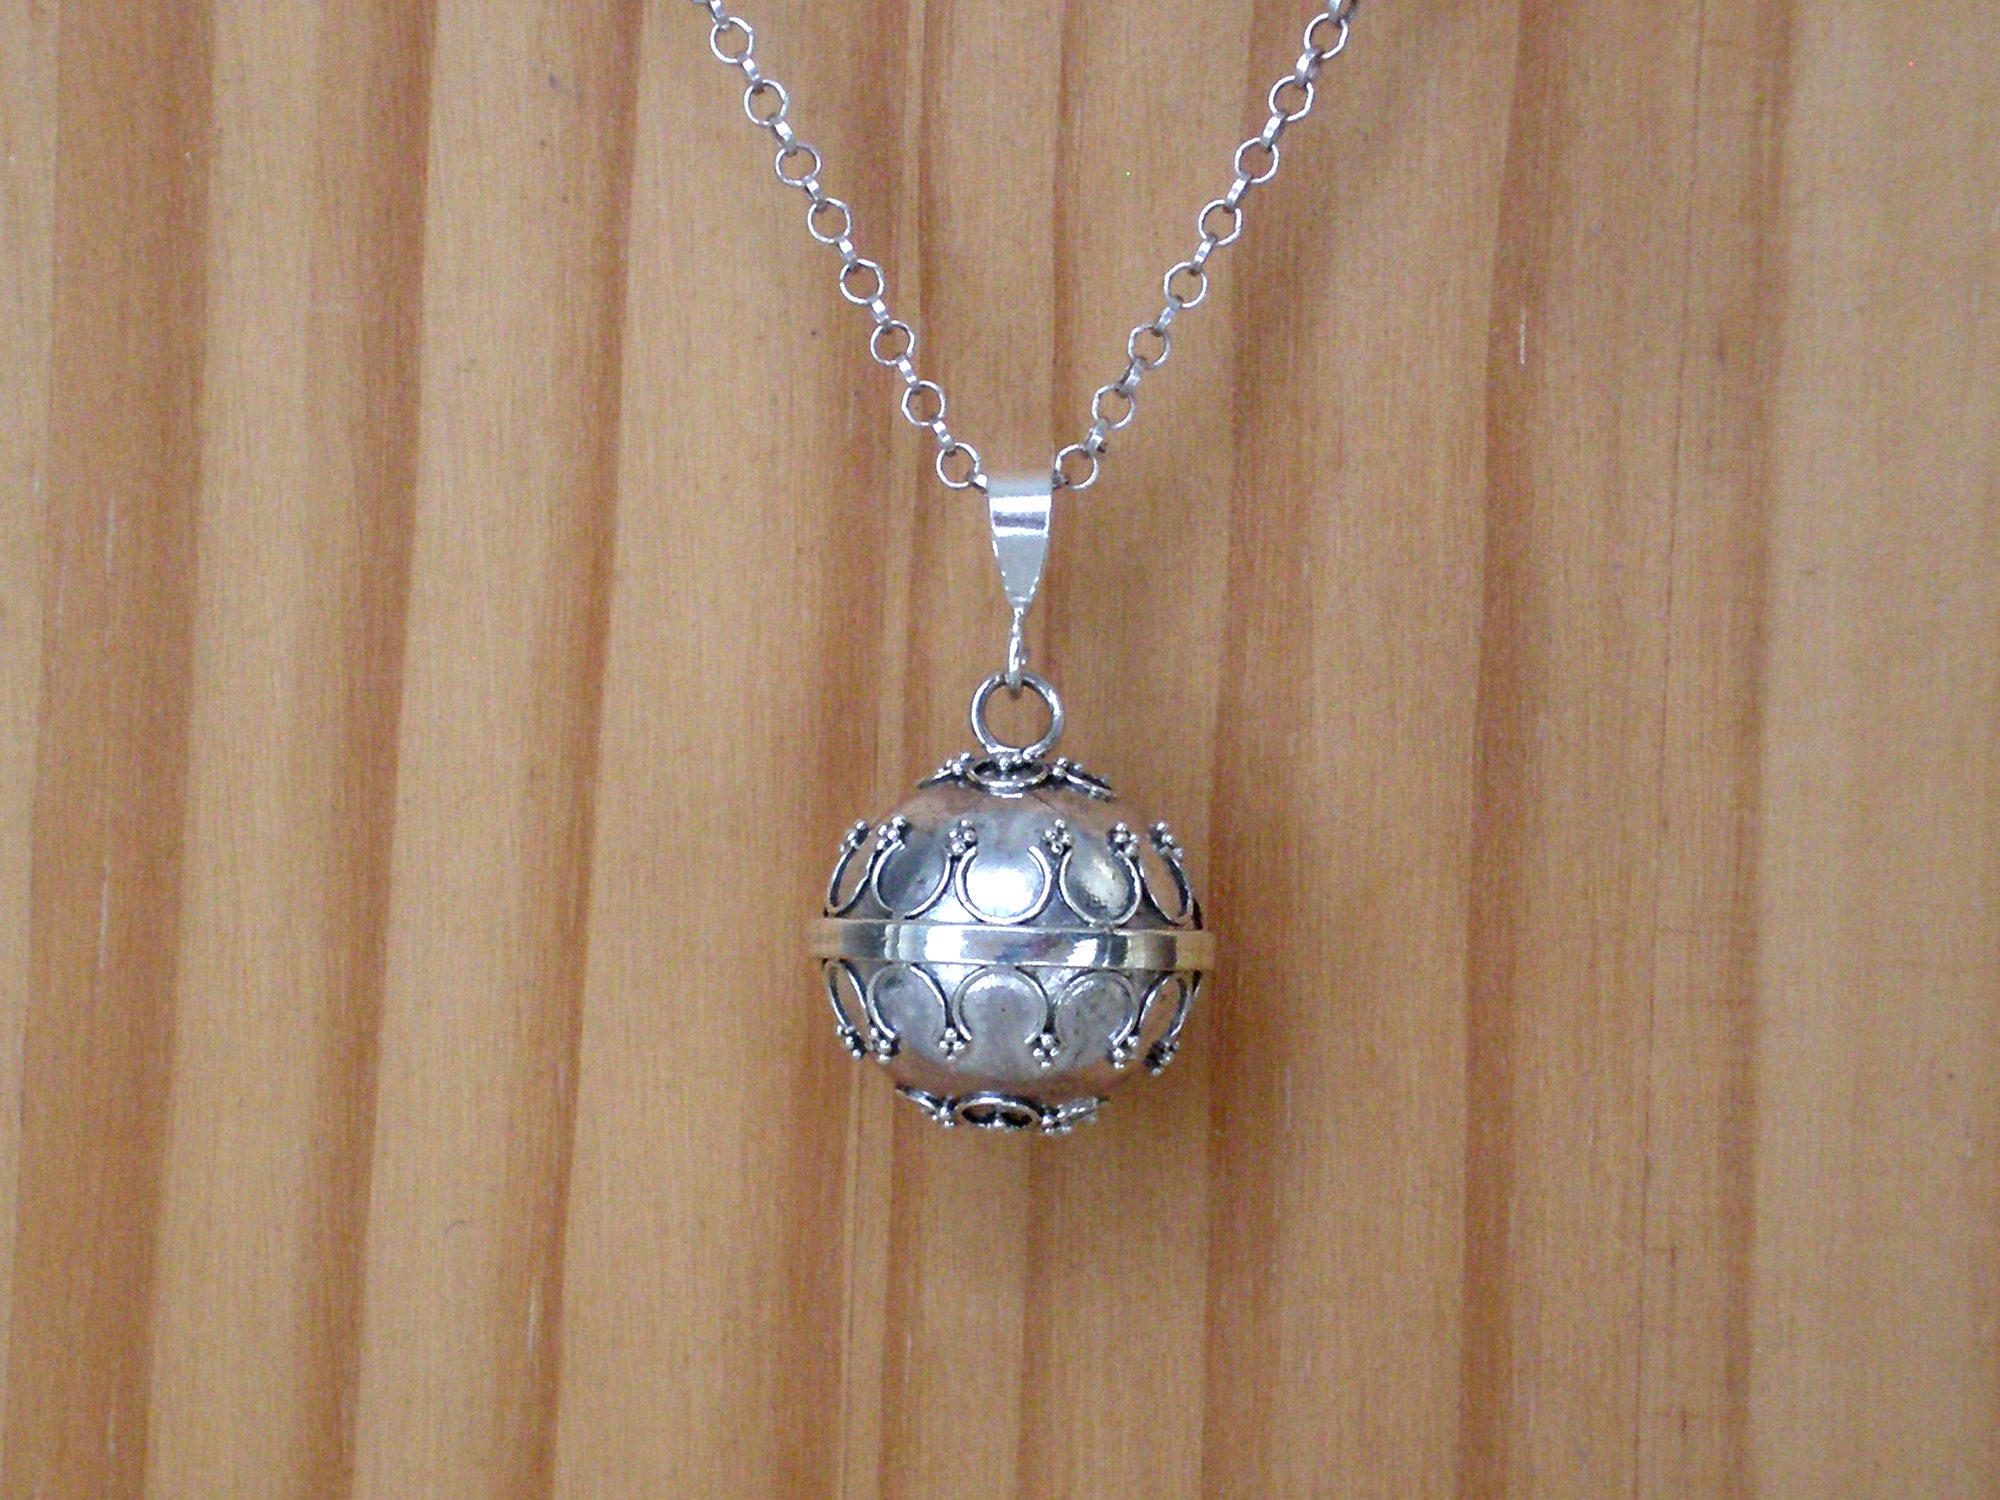 Ball Necklace Pendant ,16 Mm 925 Sterling Silver, Sphere High